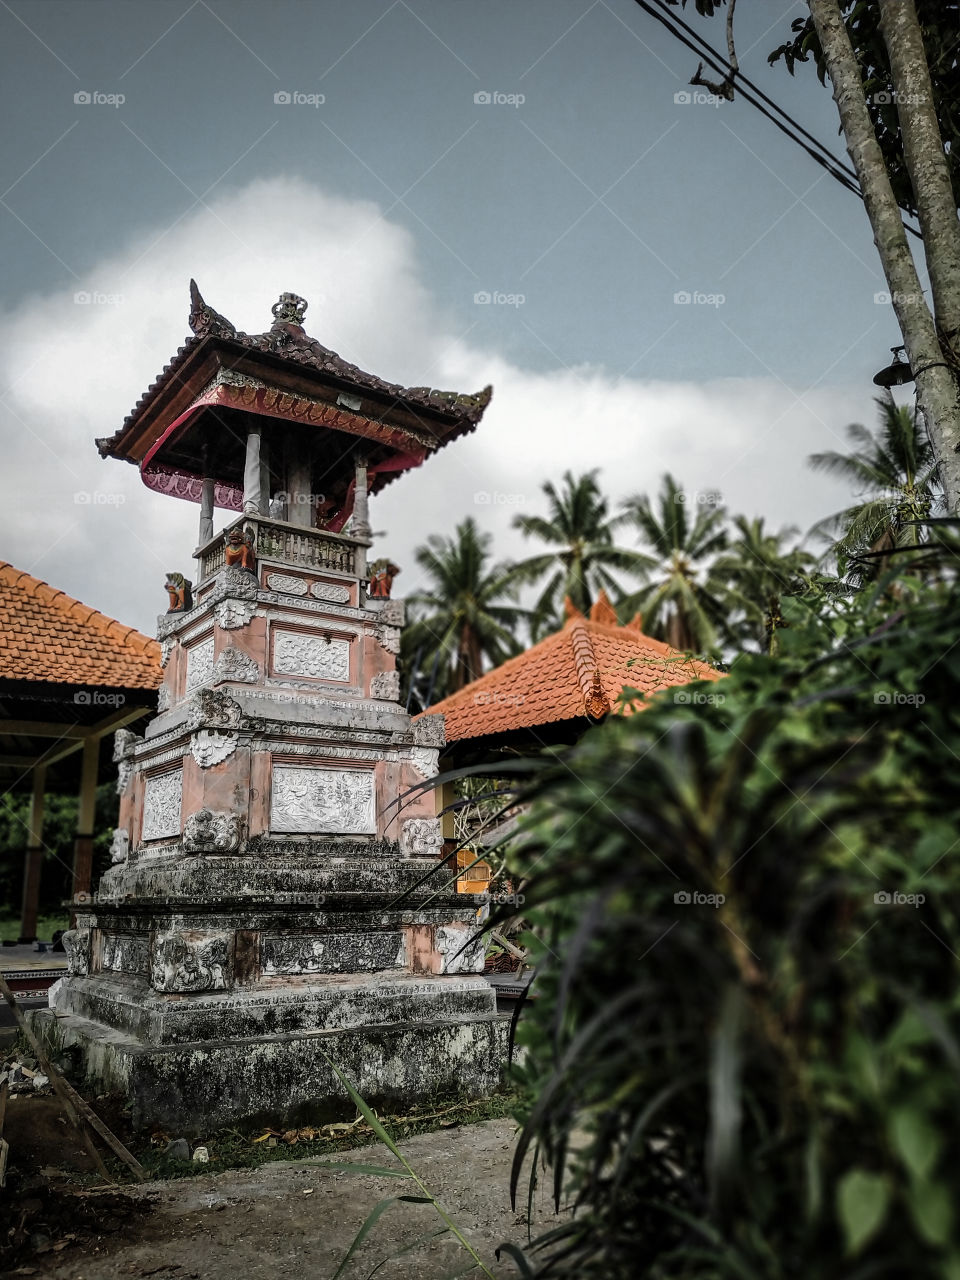 "BALE KULKUL
bale kulkul is one of the Balinese architecture that is often found in the temple area.
Kulkul is an object that functions as a means of communication to signal to the community or religious functions.